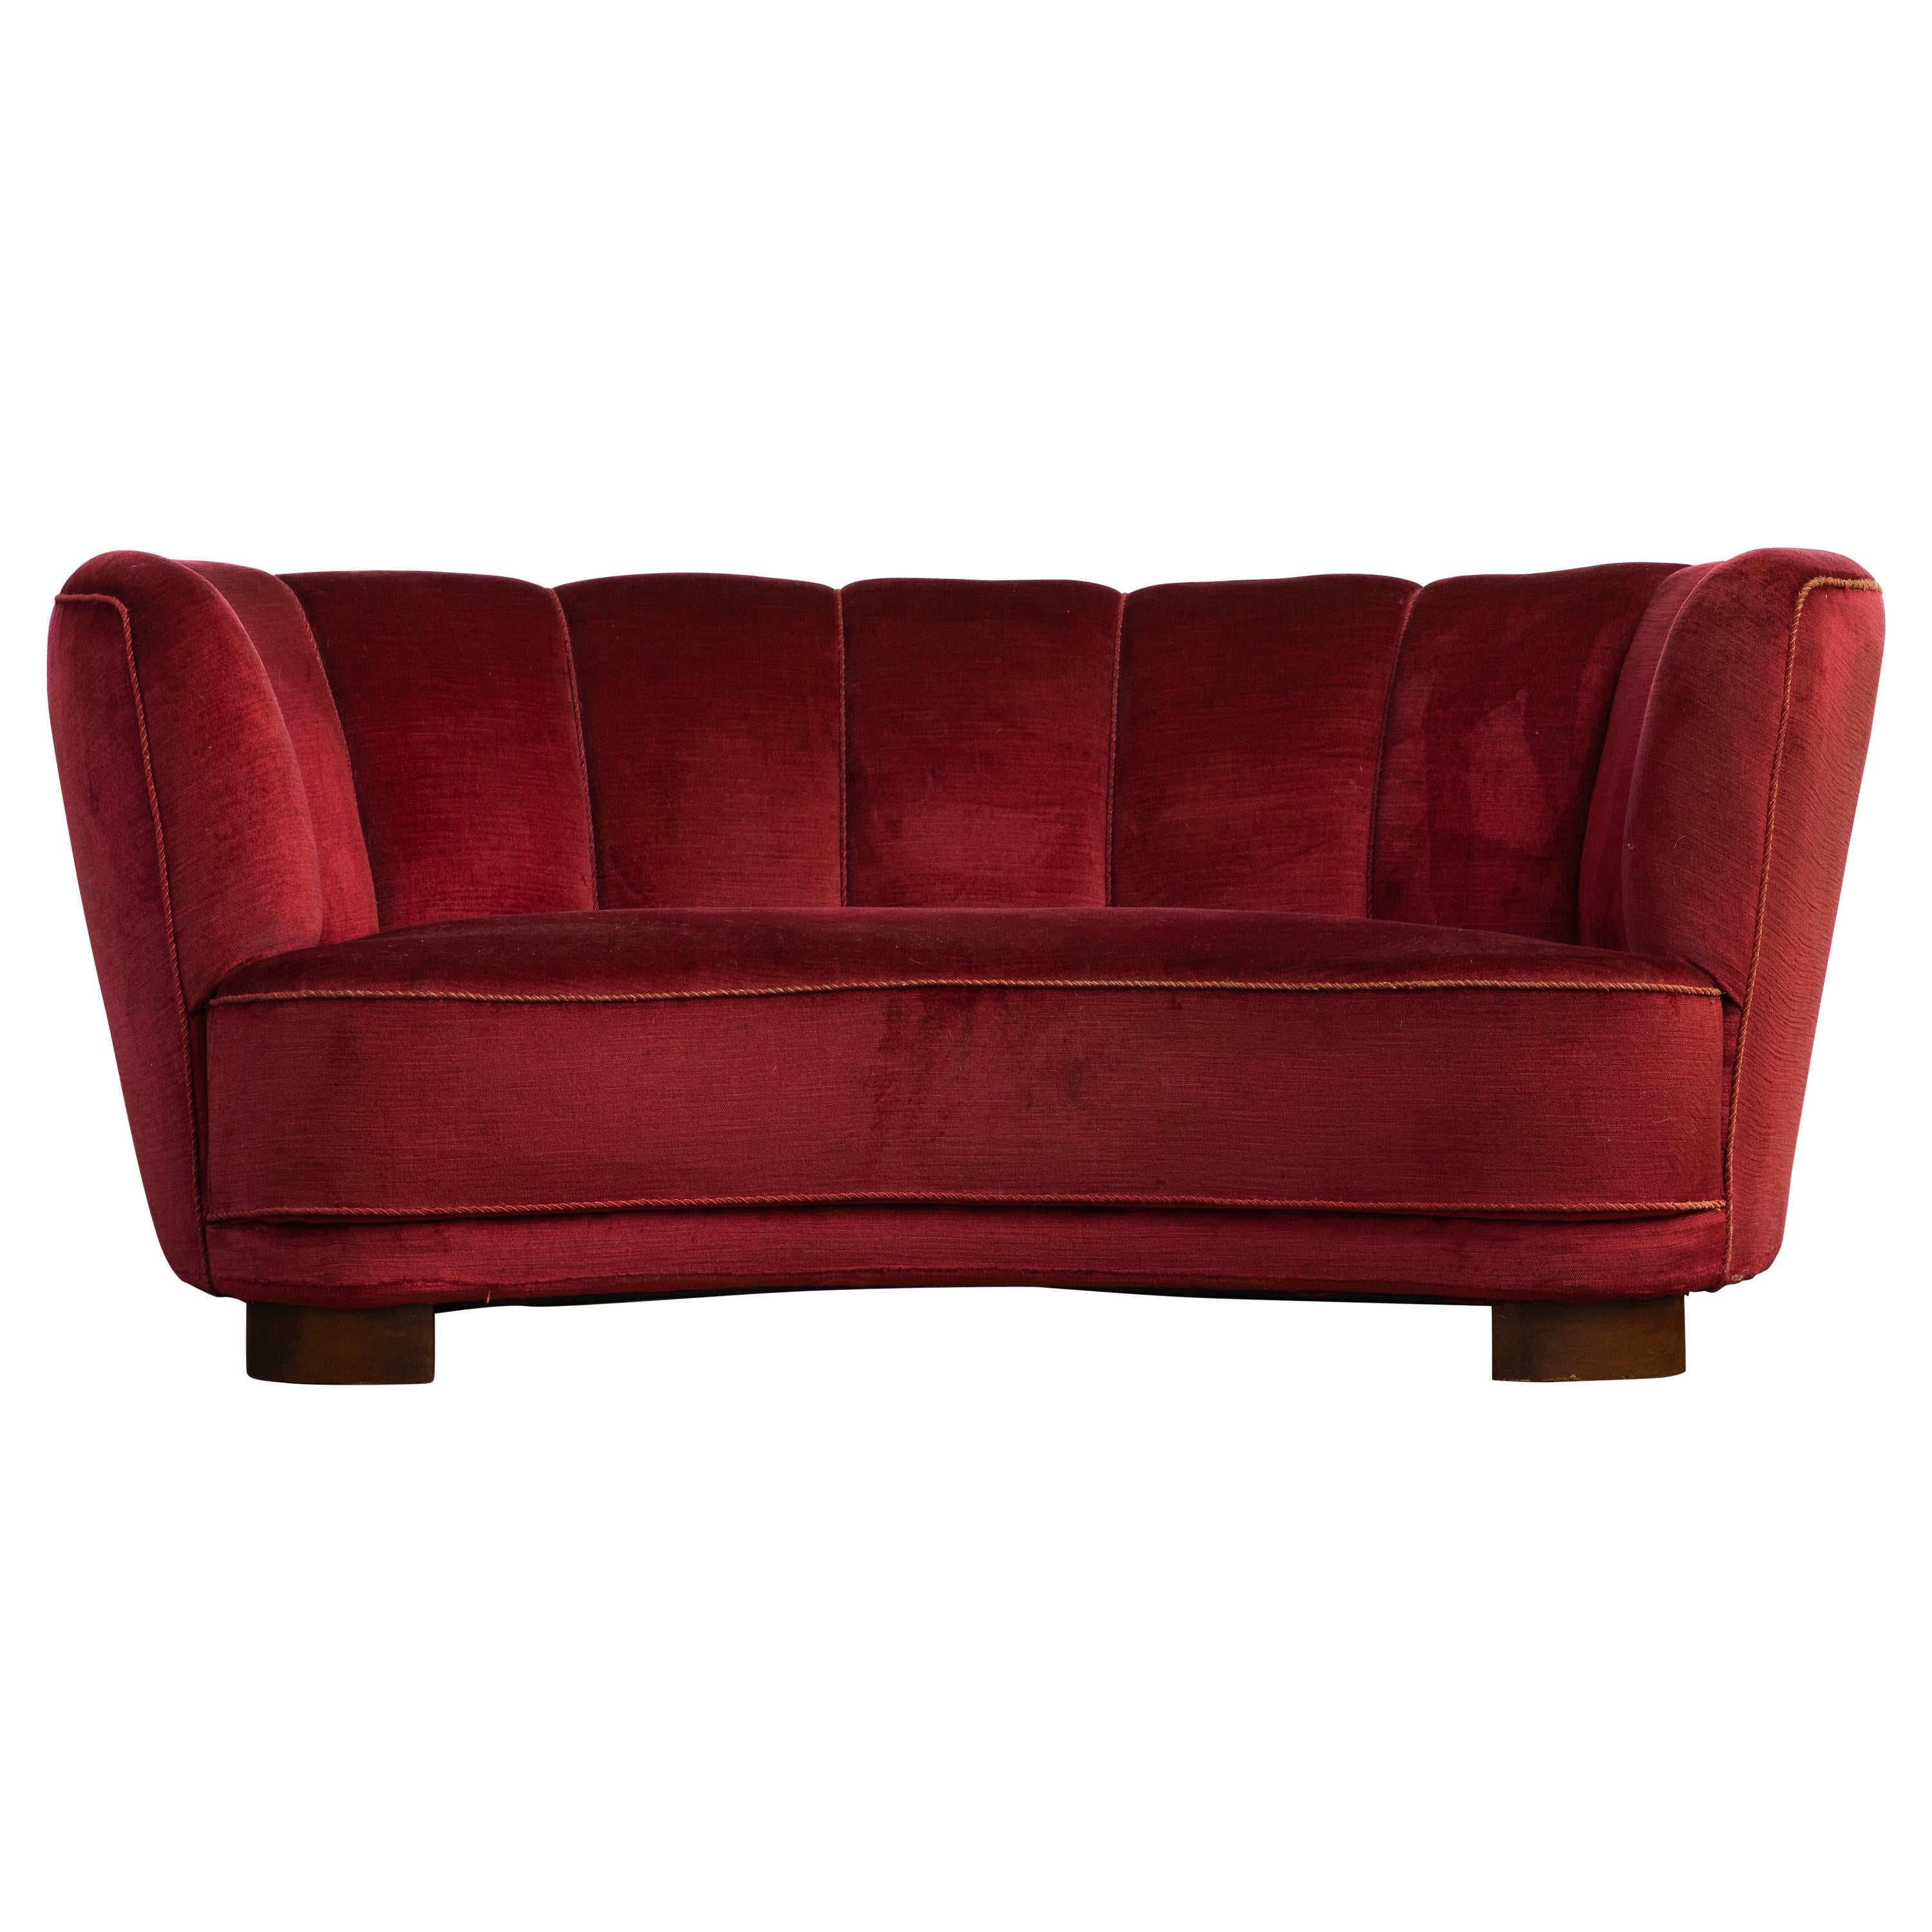 Danish 1940s Boesen Style Banana Form Curved Sofa or Loveseat in Red Mohair